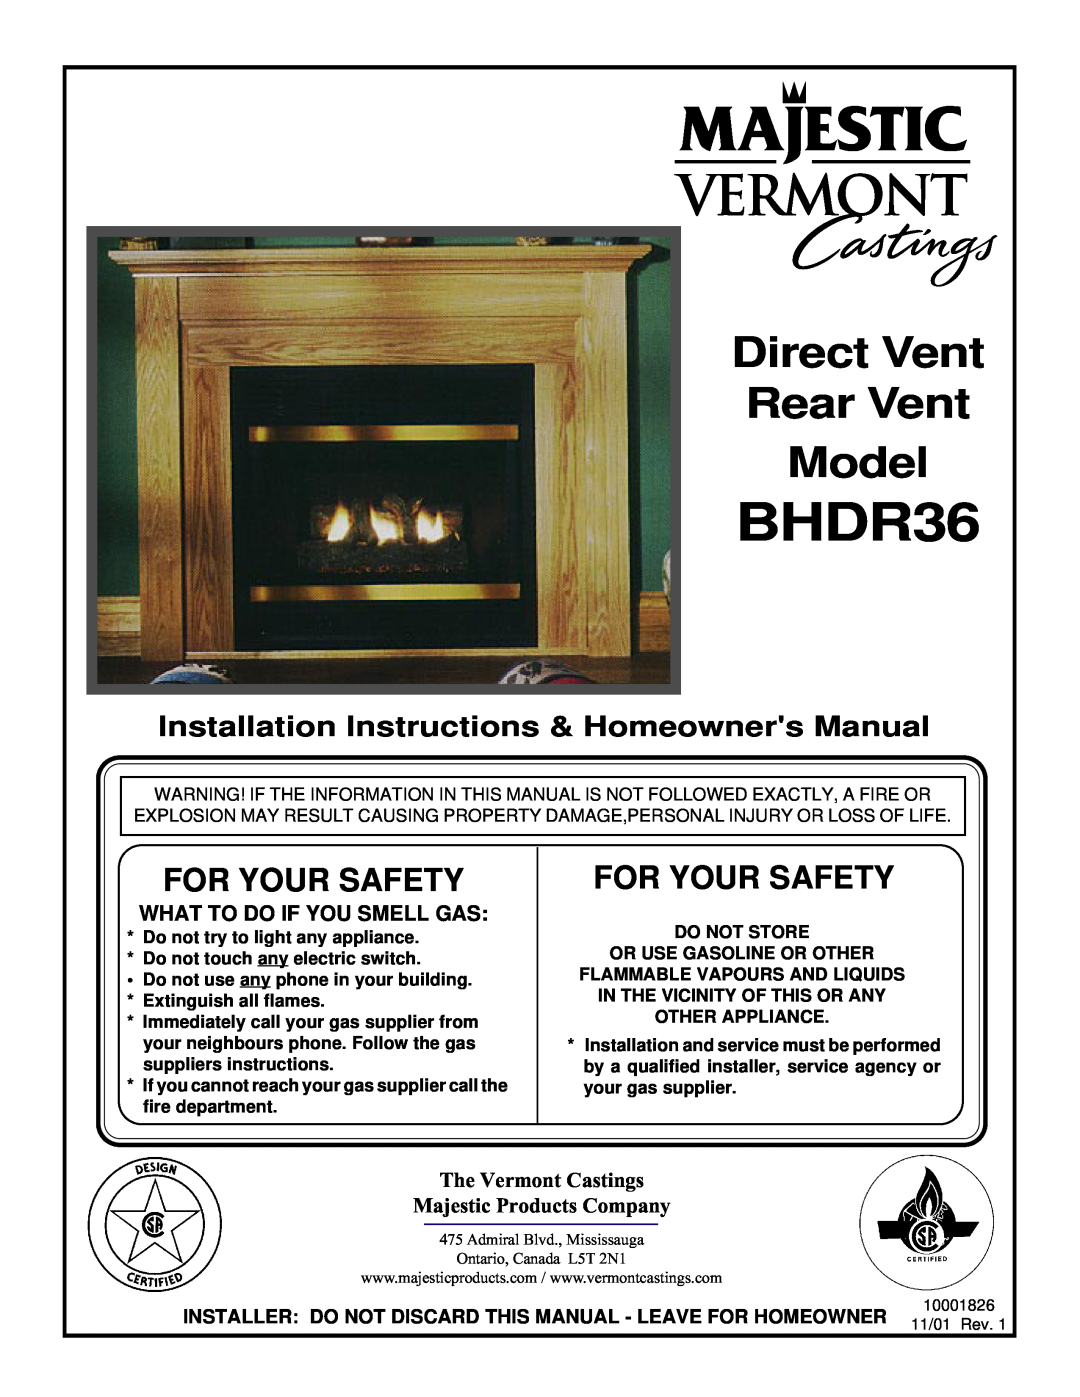 Vermont Casting BHDR36 installation instructions What To Do If You Smell Gas, Direct Vent Rear Vent Model, For Your Safety 